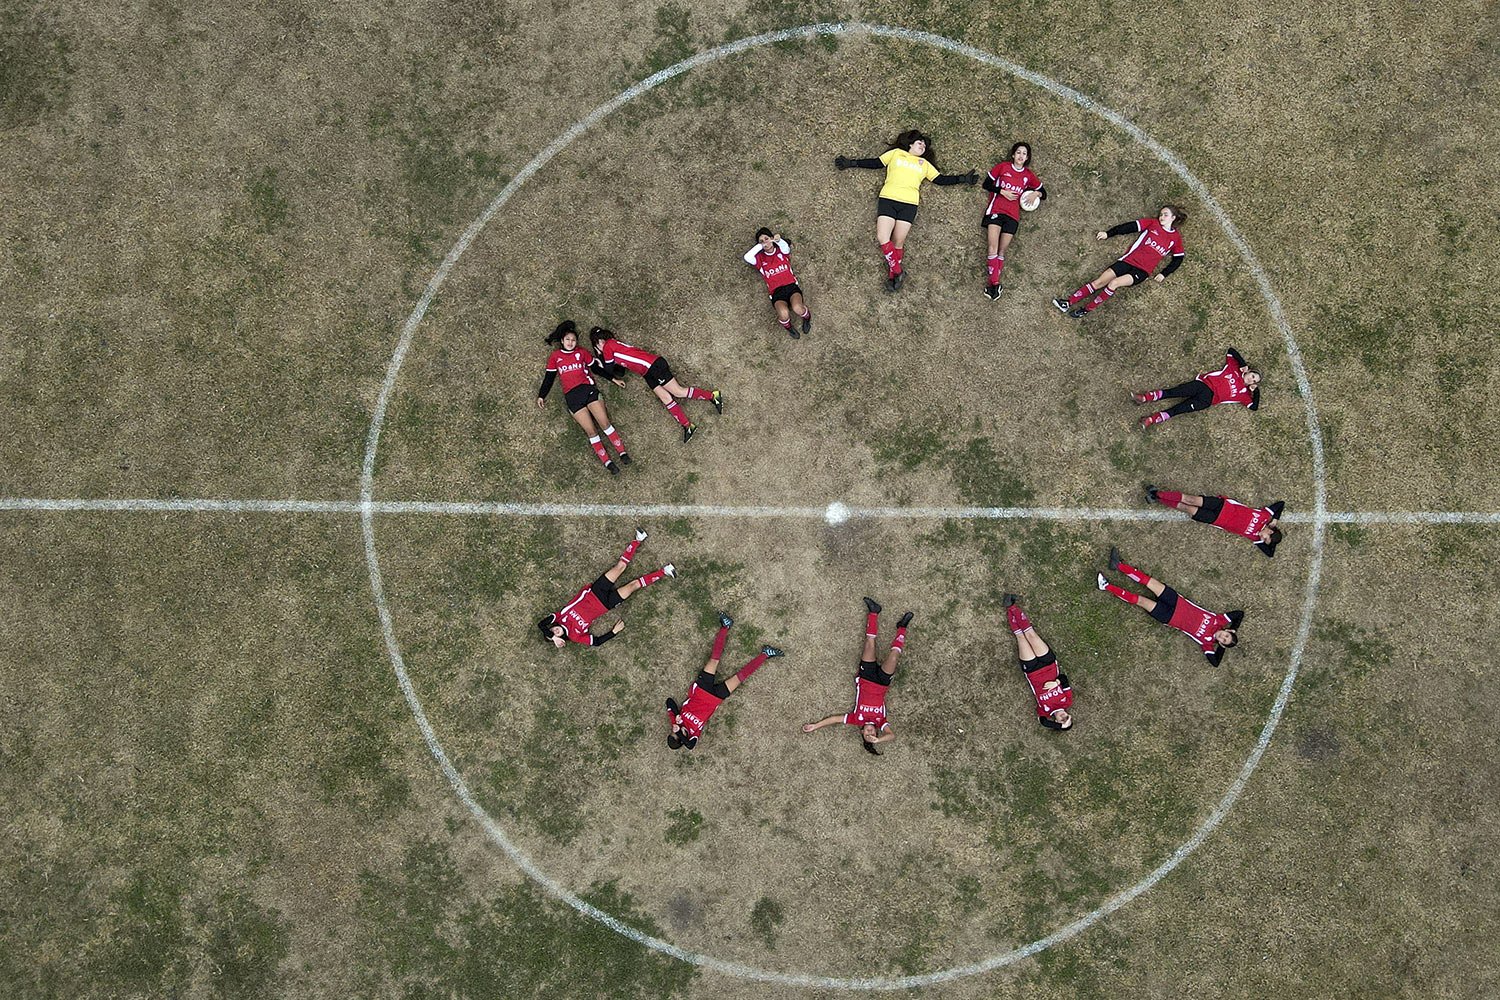  Huracan de Chabas women’s soccer team pose for photos on the field prior to their match against Alumni in Arequito, Santa Fe province, Argentina, Monday, June 19, 2023.  (AP Photo/Natacha Pisarenko) 